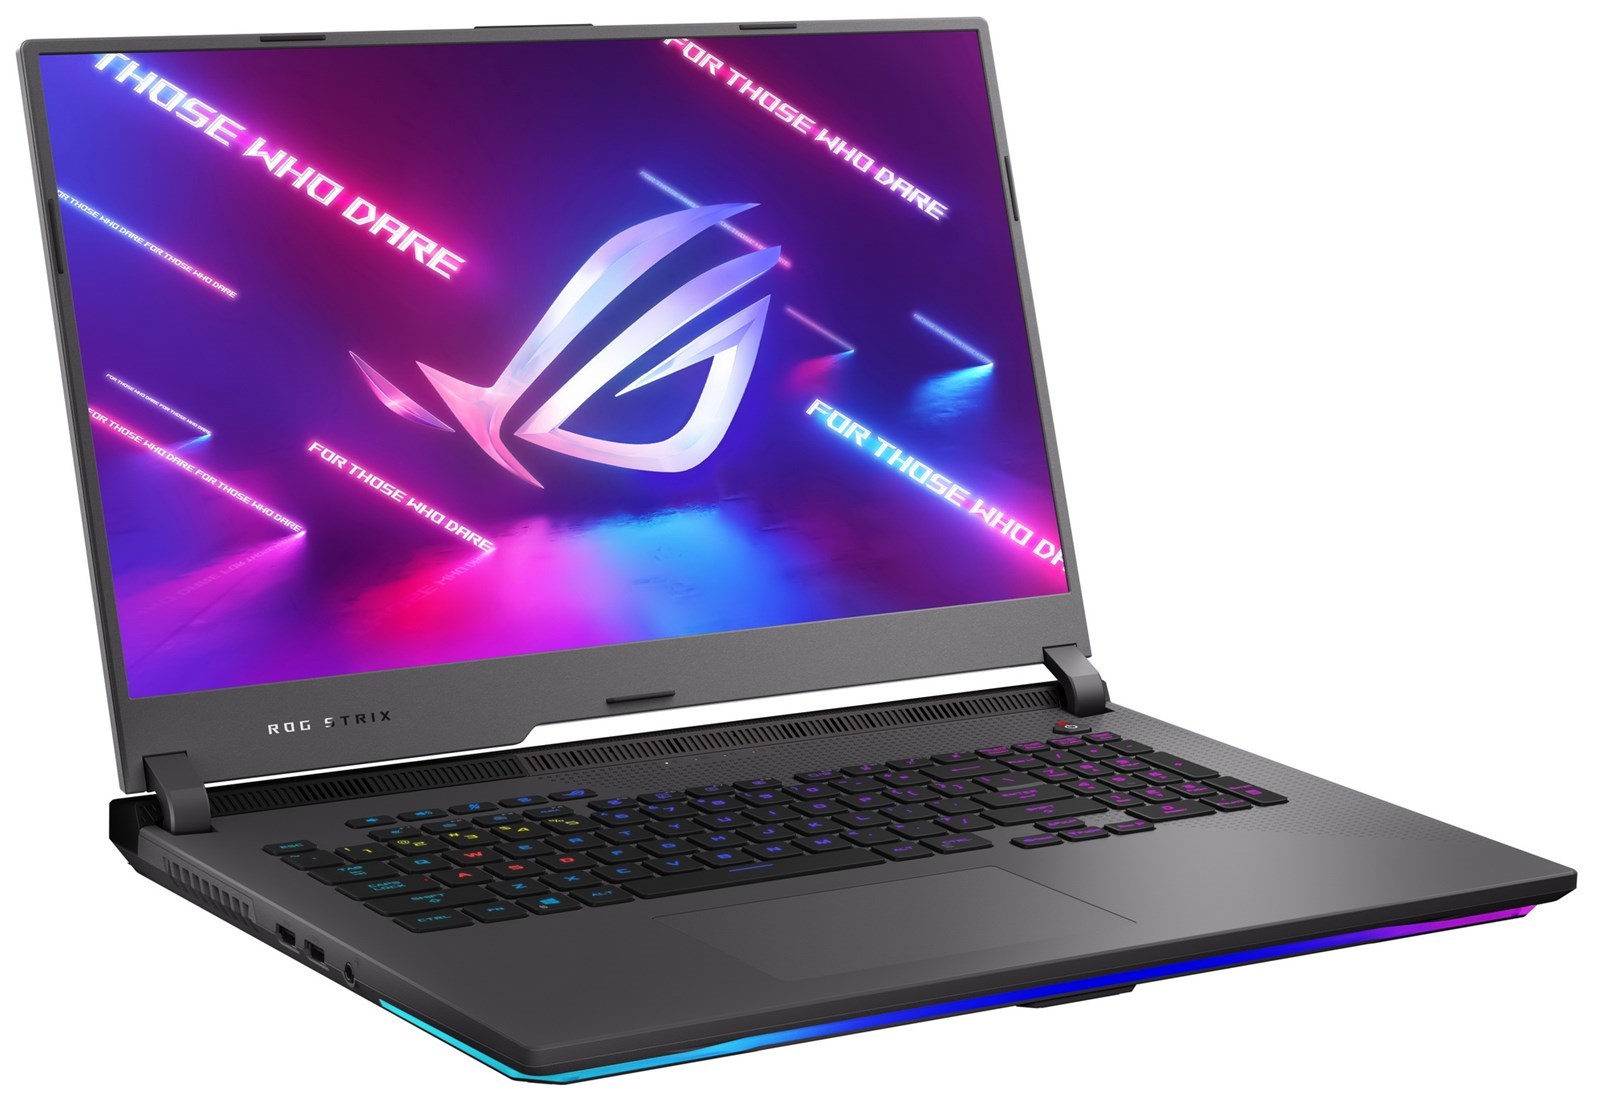 Pre-orders for Asus ROG Strix G17 with GeForce RTX 3060 and Ryzen 7 5800H now live for $ 1499 USD